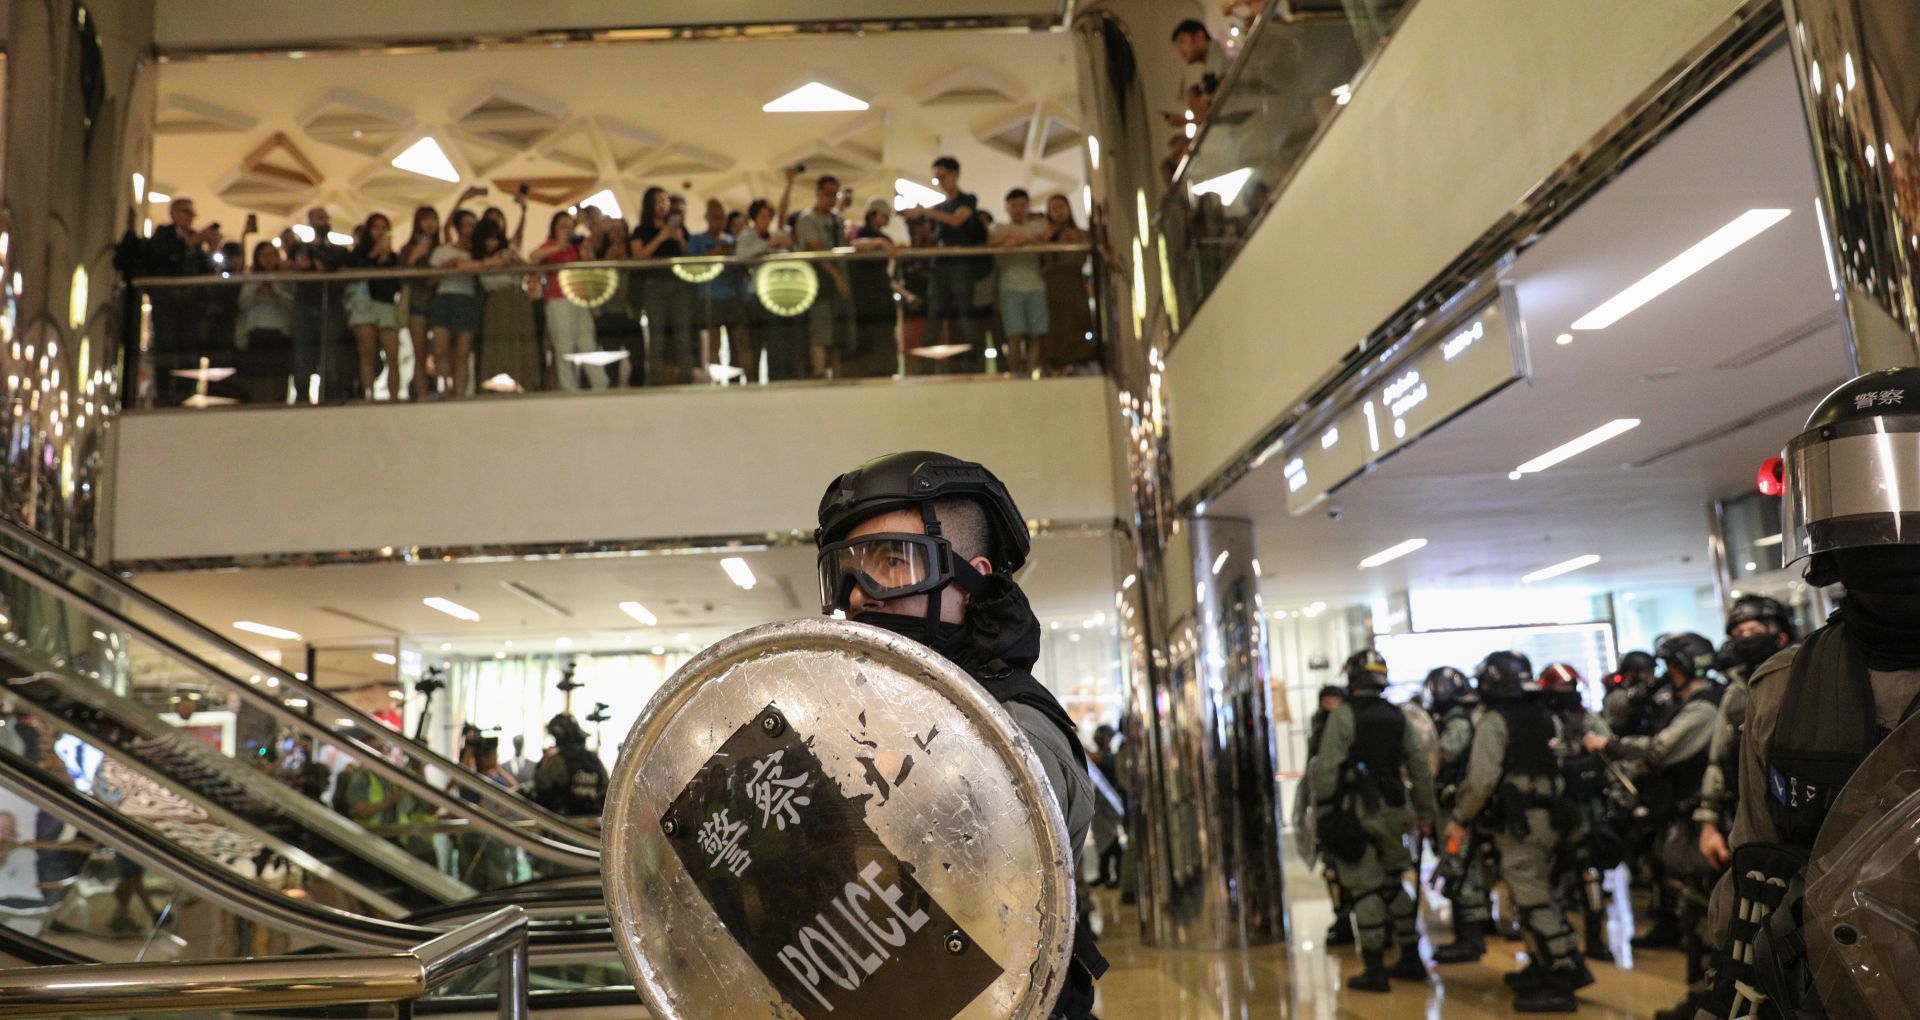 epa07969317 Riot police arrive to a shopping mall to disperse protesters during a rally against police brutality in Hong Kong, China, 03 November 2019. Hong Kong has entered a 22nd week of ongoing mass protests, originally triggered by a now withdrawn extradition bill to mainland China that have turned into a wider pro-democracy movement.  EPA/JEROME FAVRE